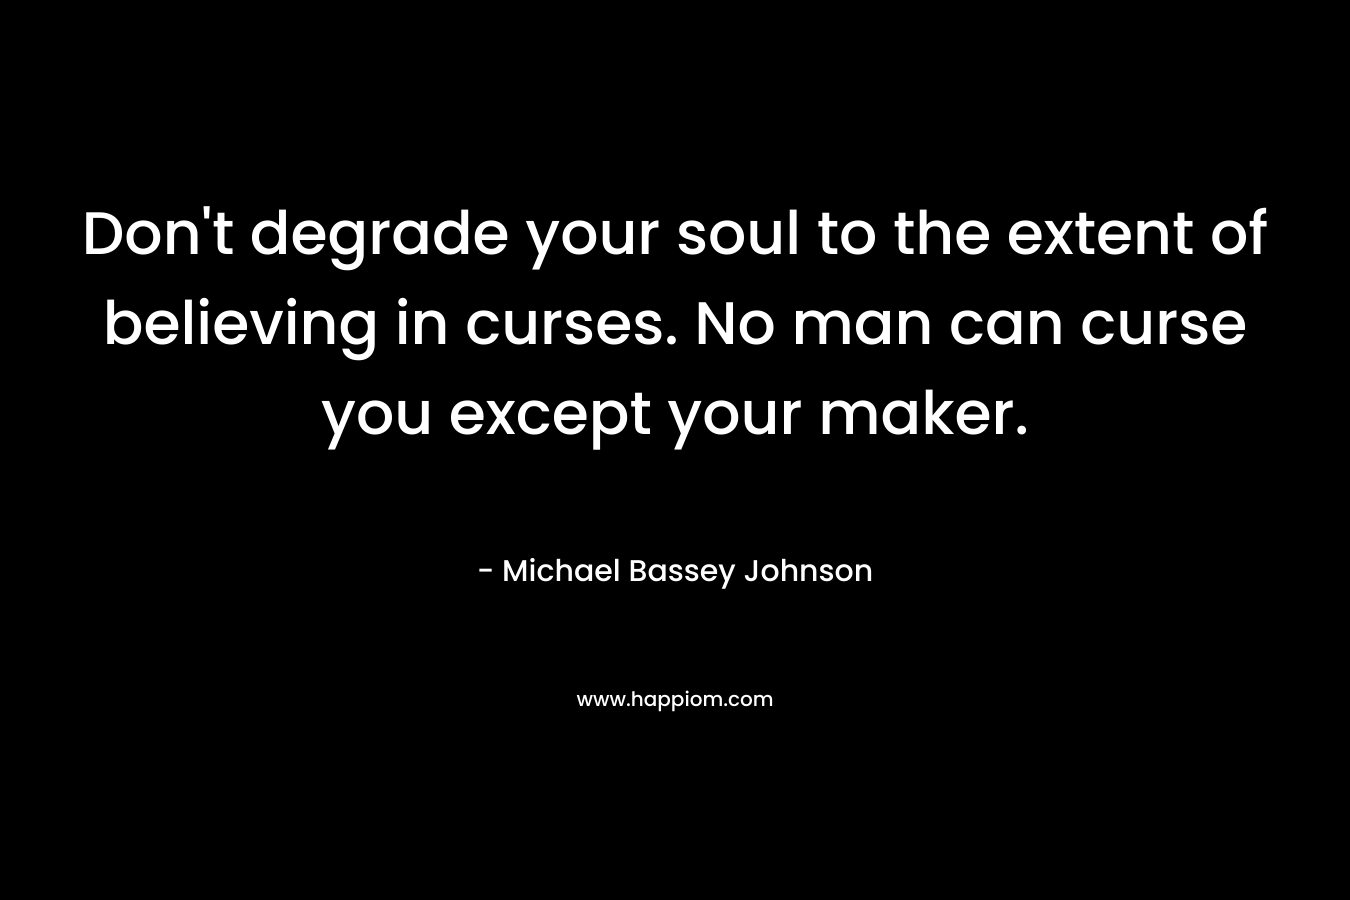 Don’t degrade your soul to the extent of believing in curses. No man can curse you except your maker. – Michael Bassey Johnson